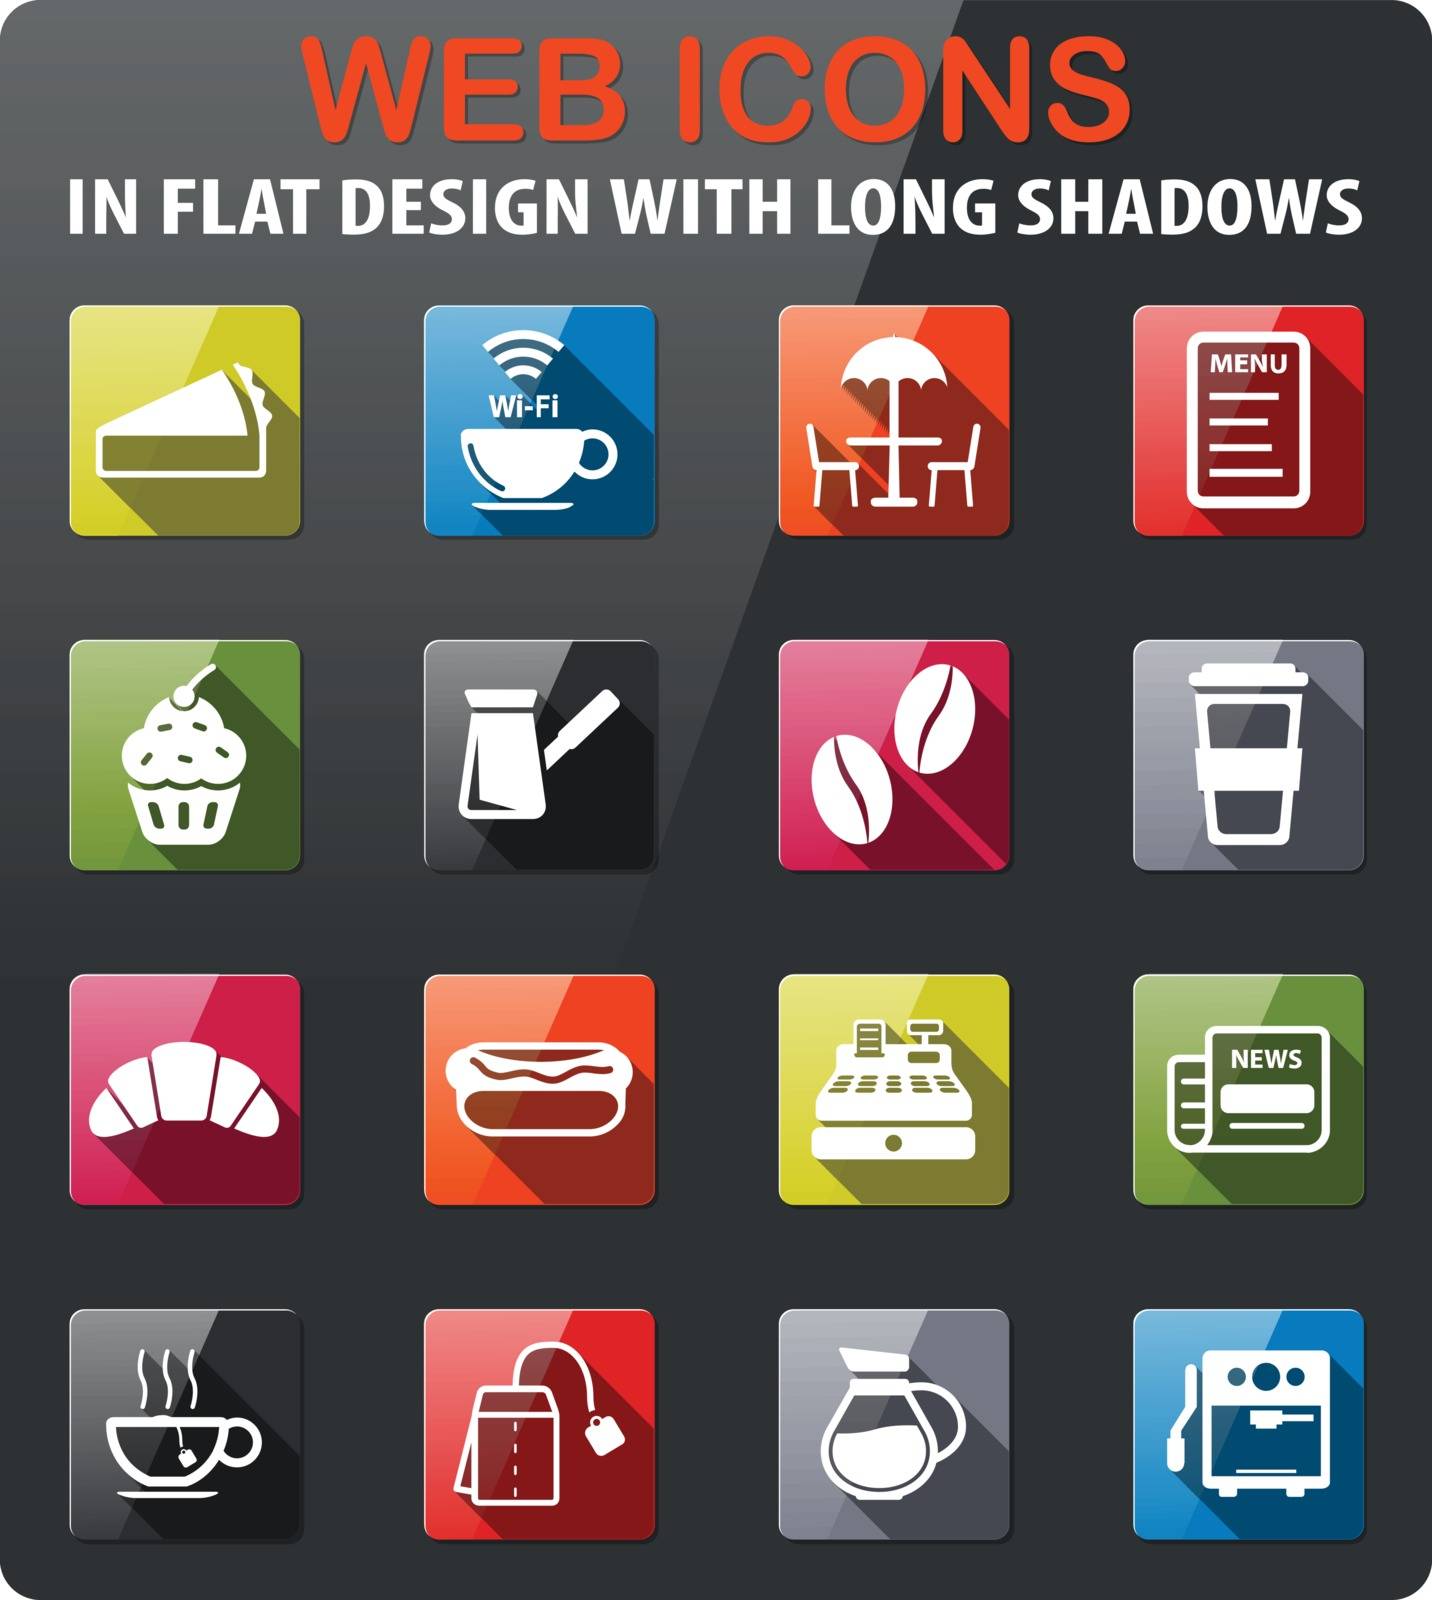 Cafe icons set in flat design with long shadow